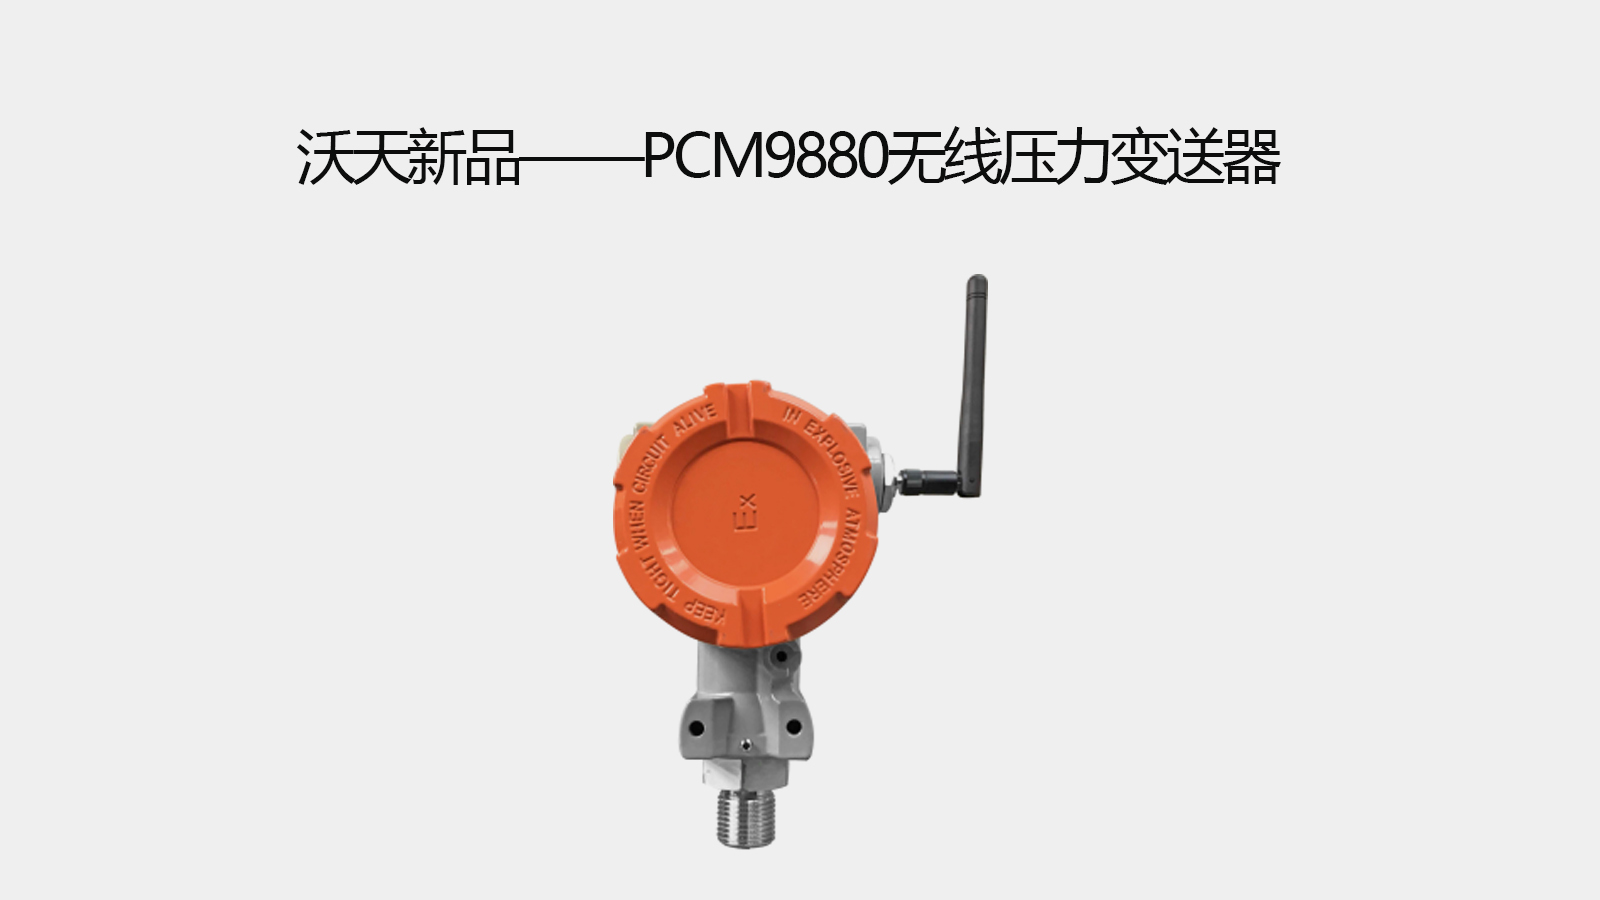 Wotian new product-PCM9880 wireless pressure transmitter